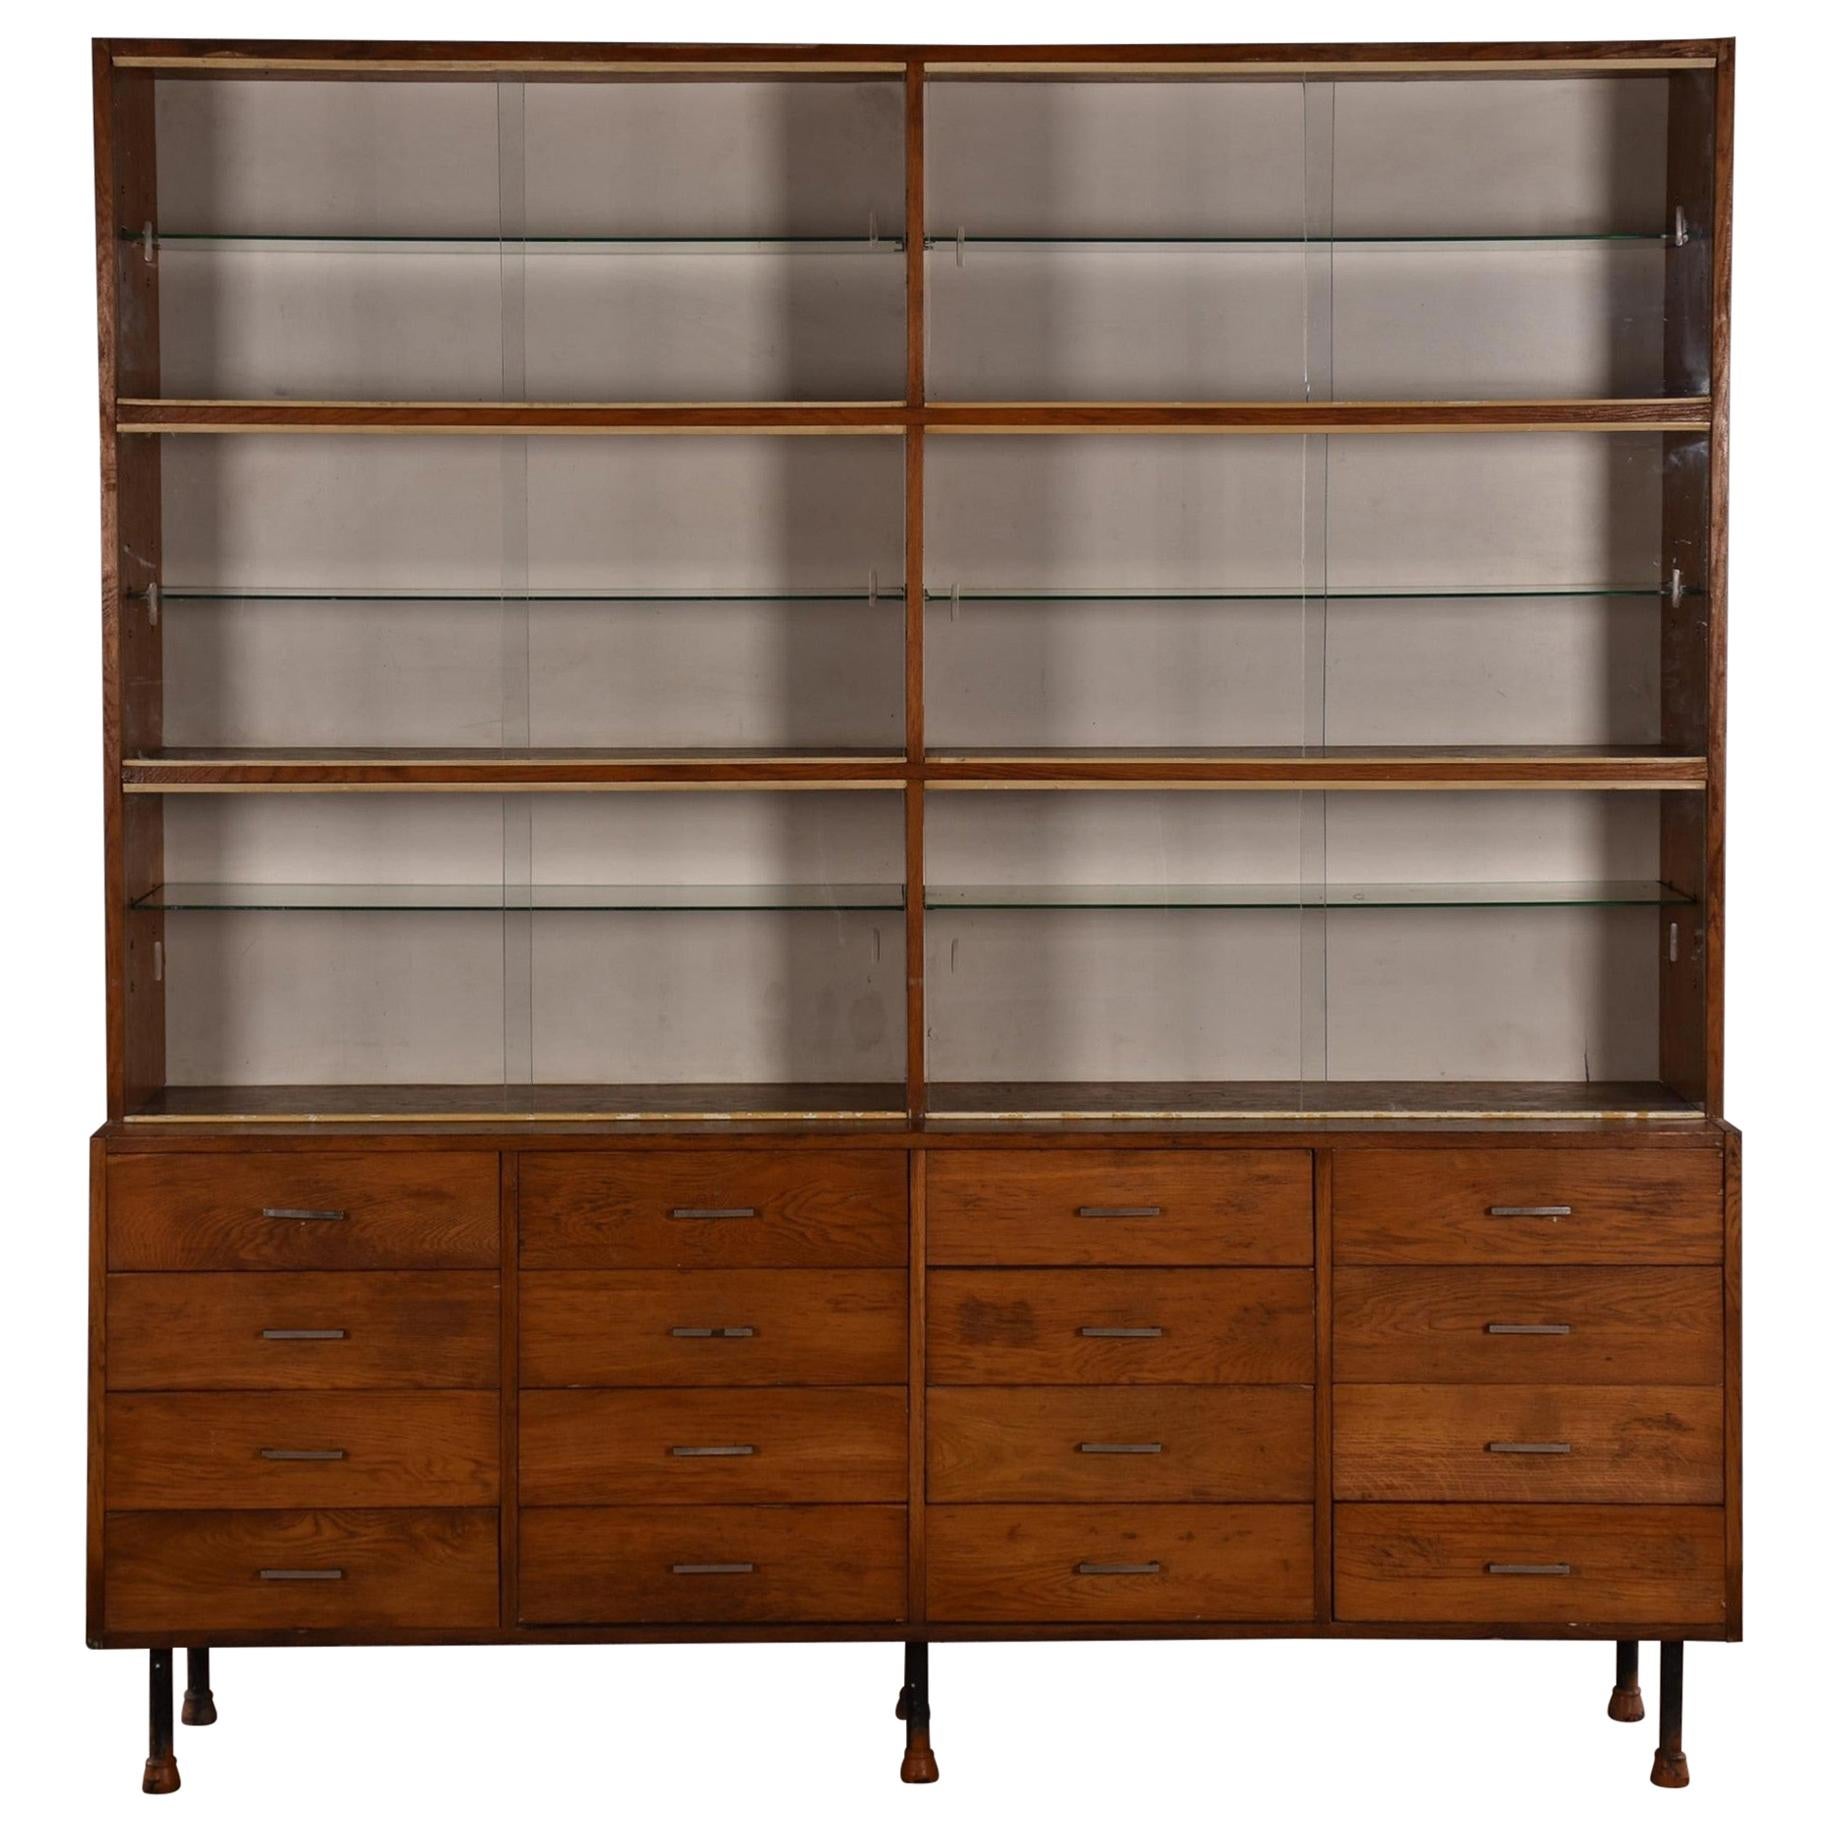 Apothecary Haberdashery Display Cabinet circa 1930s Number 12